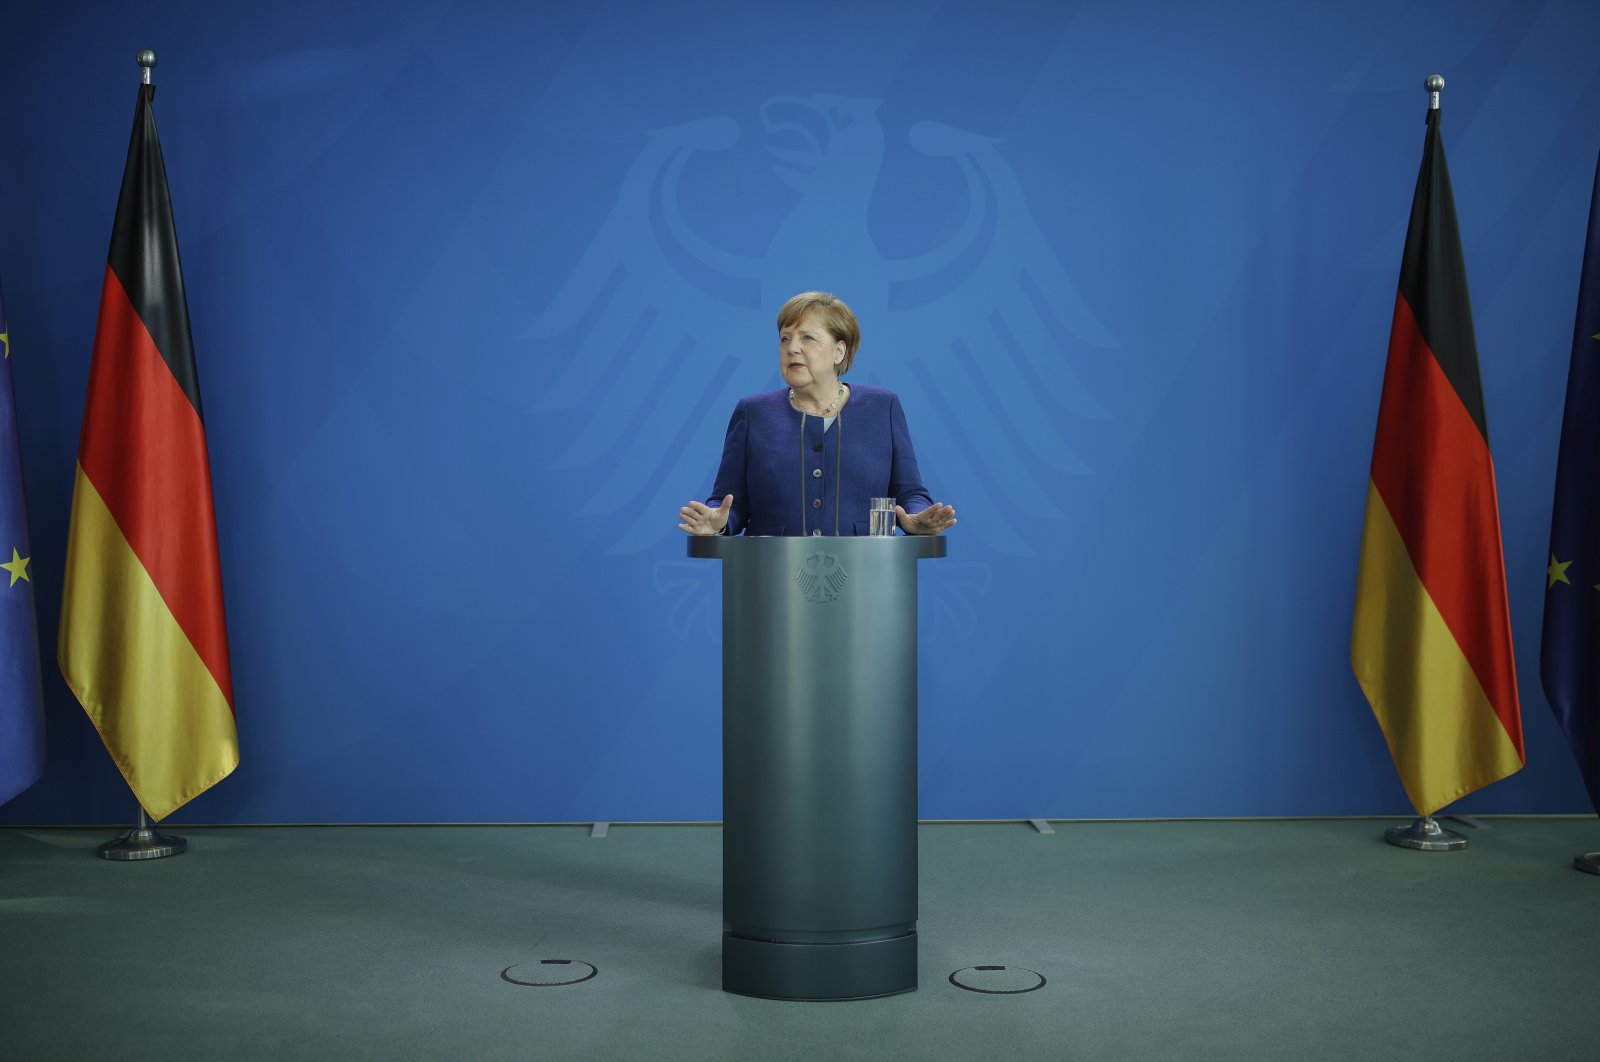 German Chancellor Angela Merkel addresses a press conference following a meeting with international economic and financial organizations on the effects of the coronavirus pandemic, at the Chancellery, Berlin, Germany, May 20, 2020. (AP Photo)